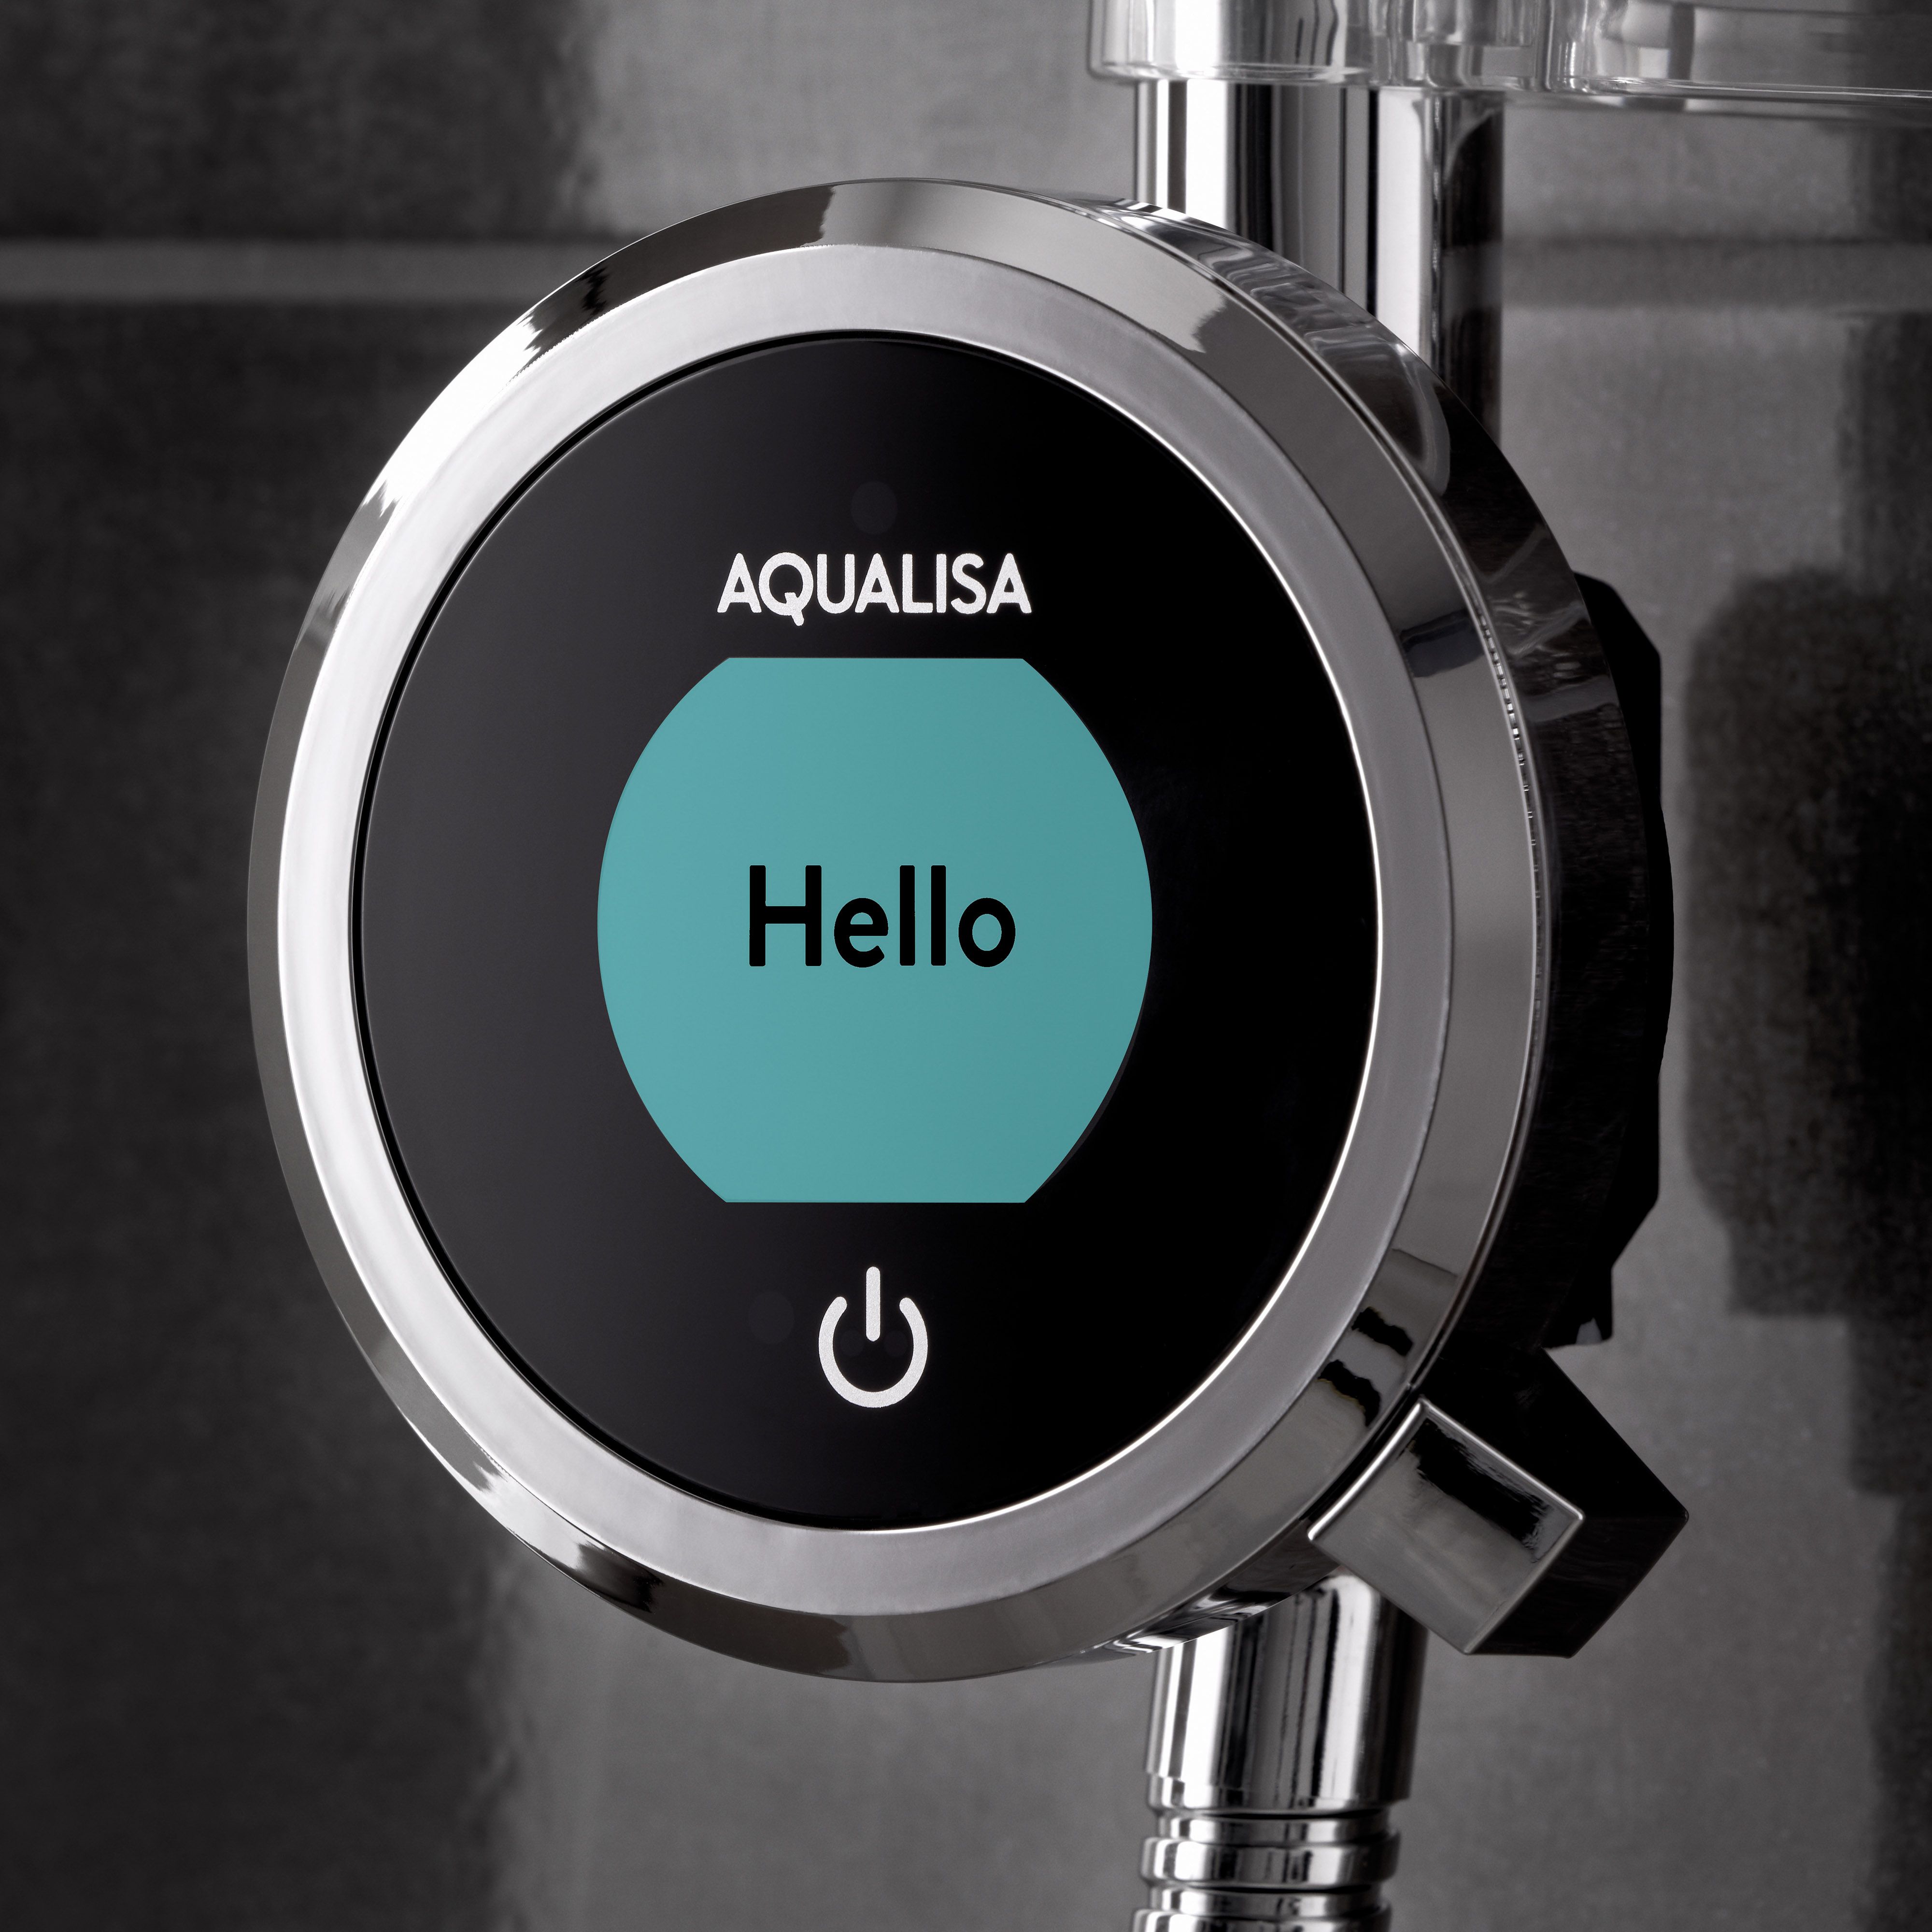 Aqualisa Optic Q Exposed valve Gravity-pumped Smart Digital mixer Shower with Adjustable & Ceiling-fixed head